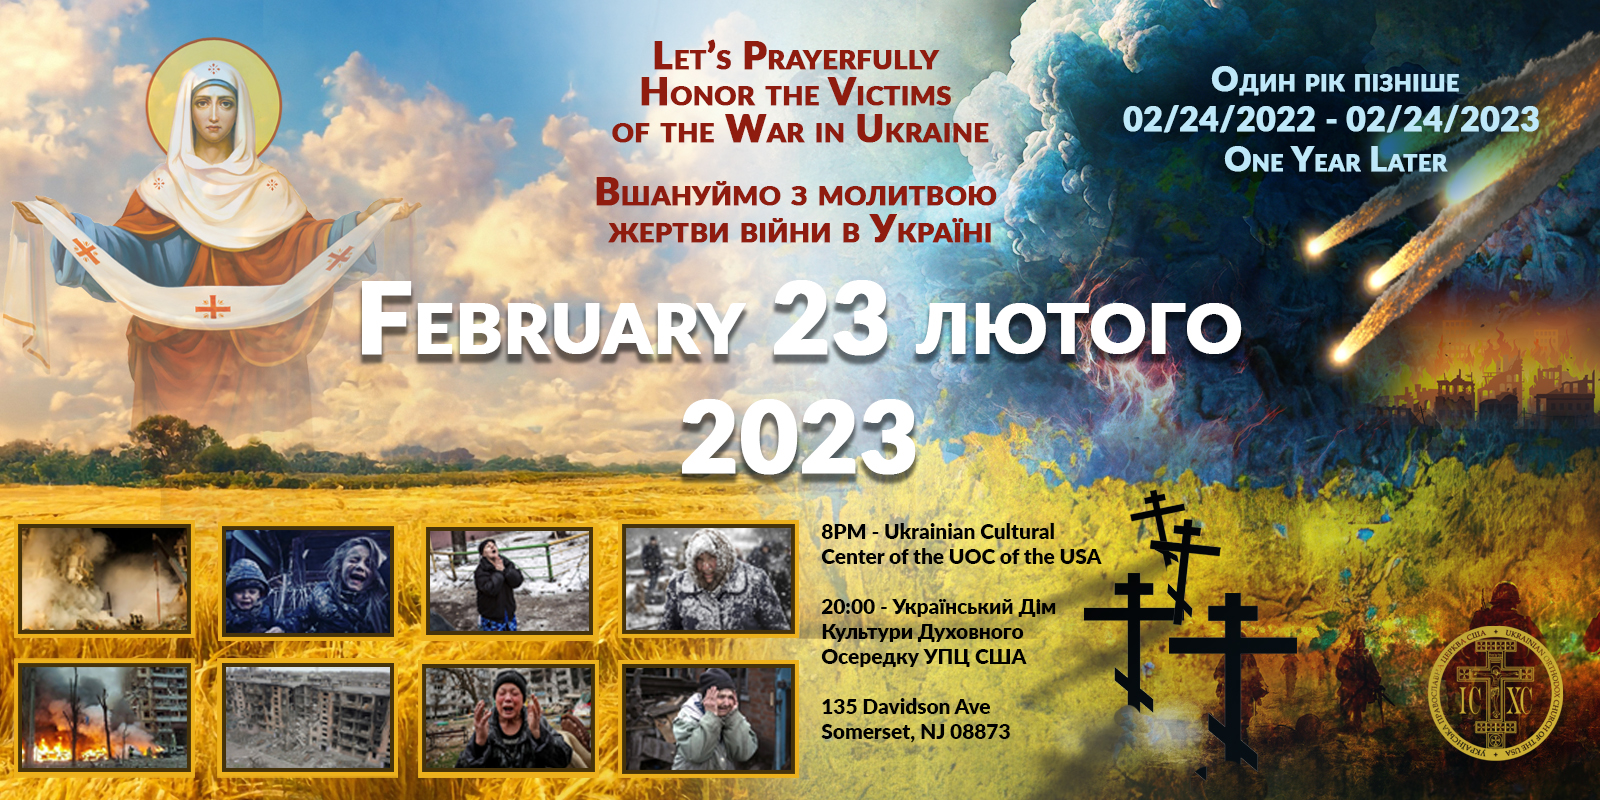 Let's Prayerfully Honor the Victims of the War in Ukraine